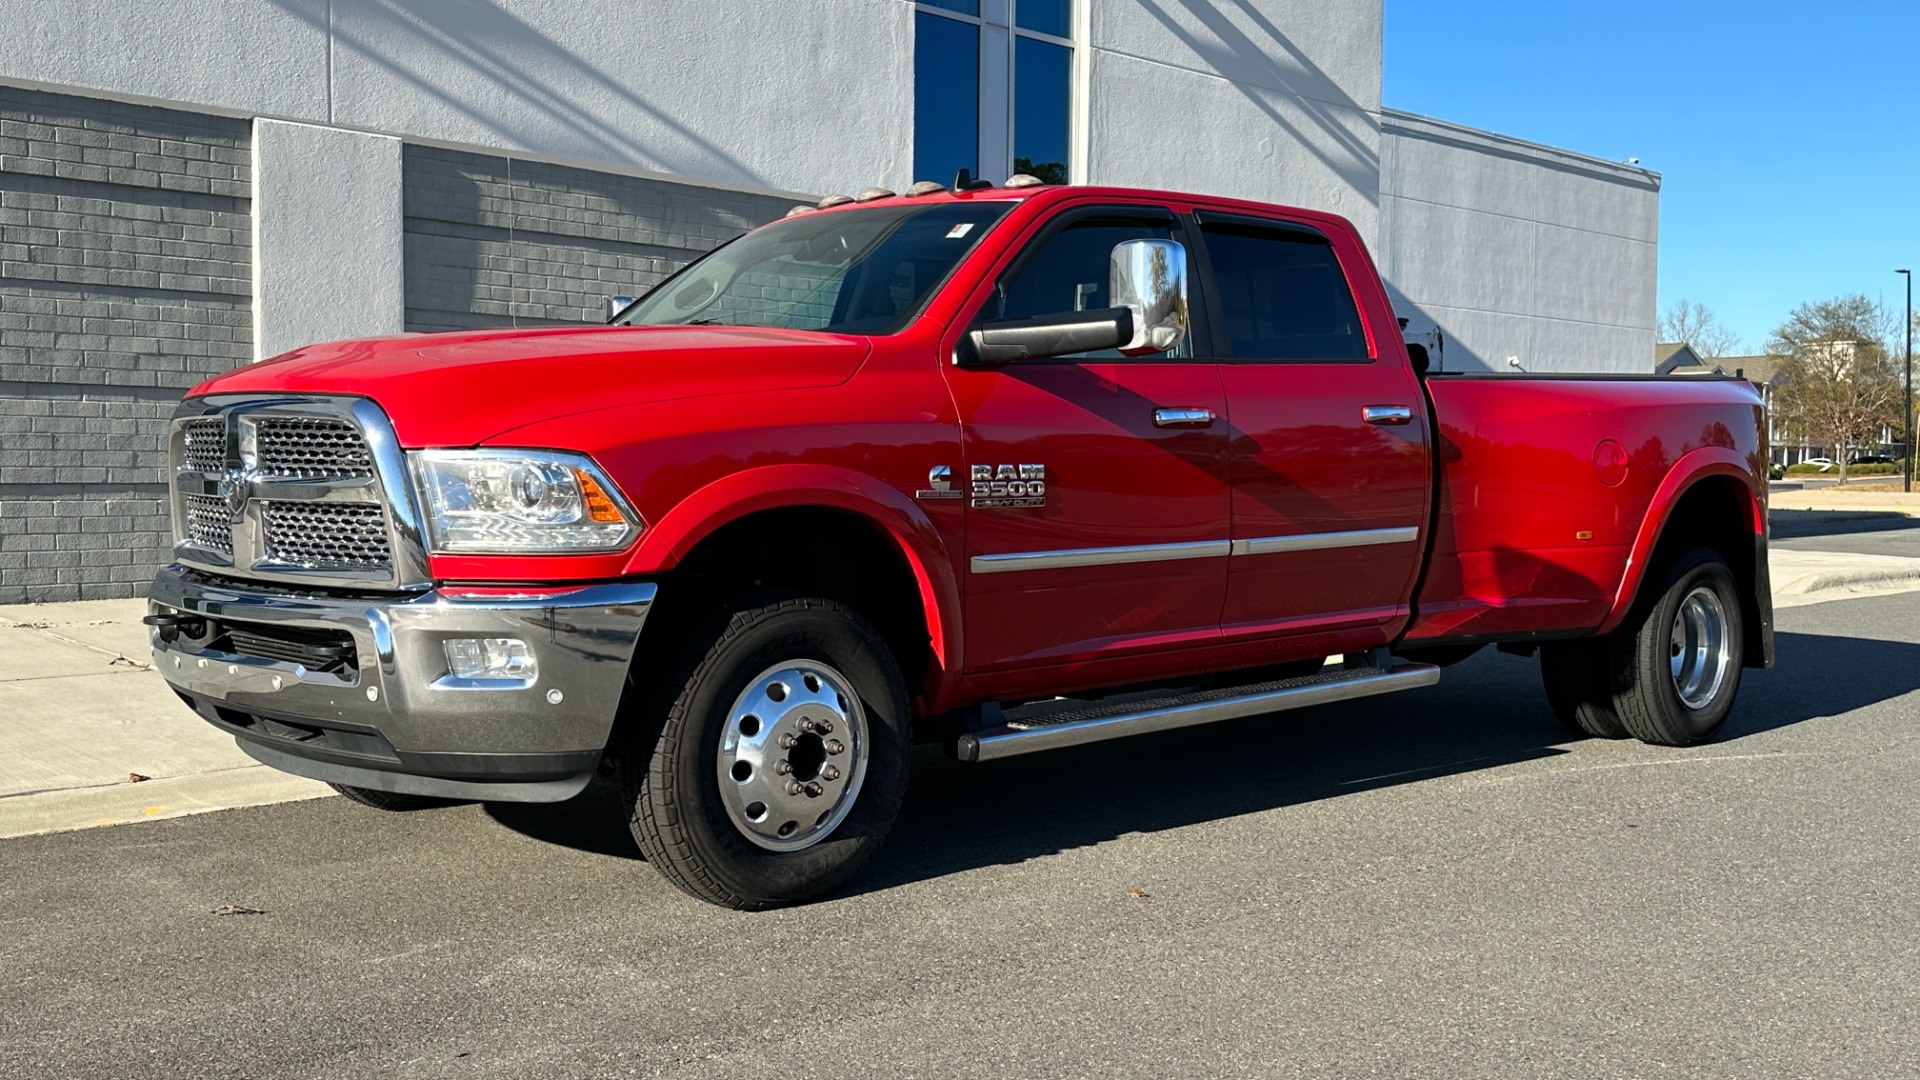 Used 2017 Ram 3500 LARAMIE / TURBO DIESEL / AISIN TRANSMISSION / DUAL REAR WHEELS / 4X4 / CREW for sale $45,995 at Formula Imports in Charlotte NC 28227 2